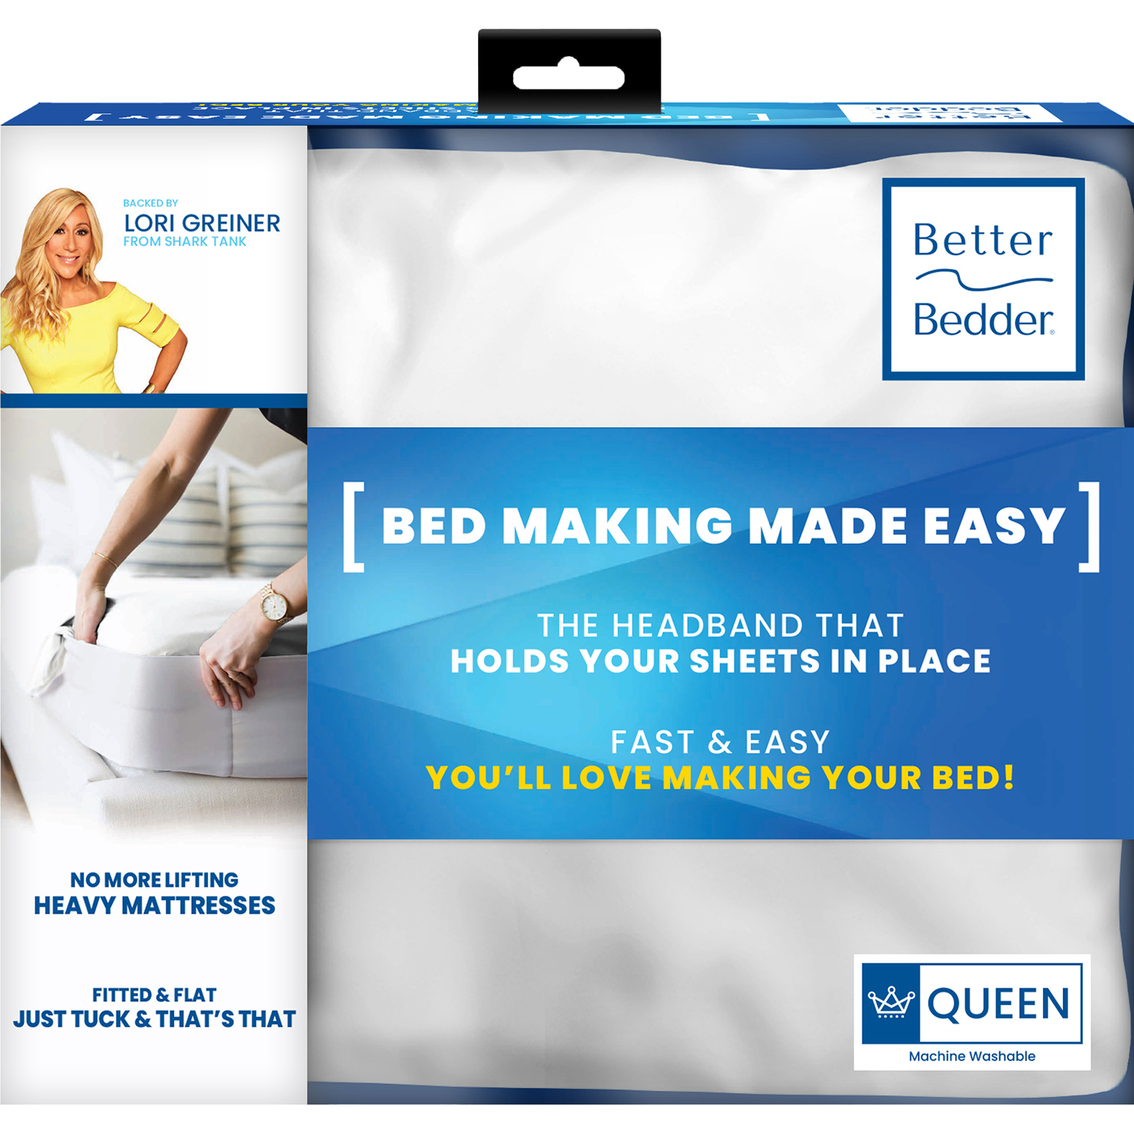 What's the Better Bedder? Bed-Making Made Easy 